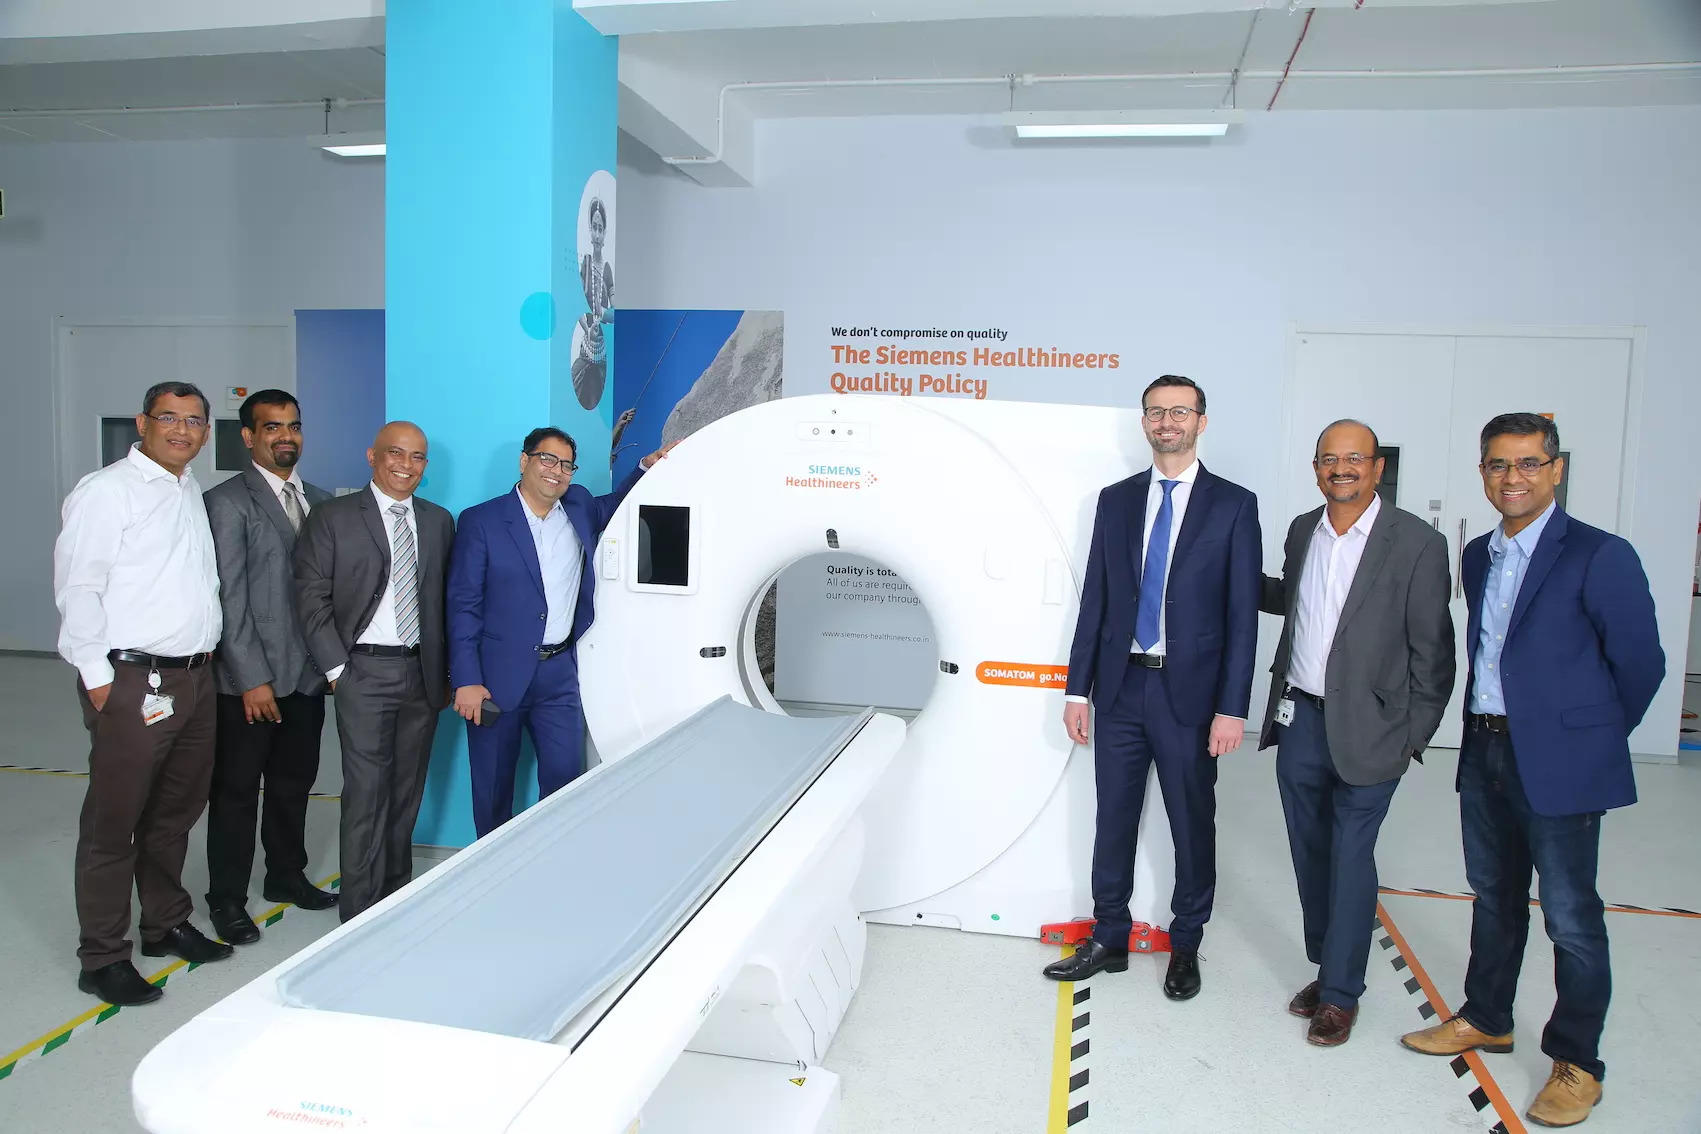 Siemens Healthineers expands manufacturing footprint in India with new line of CT scanners